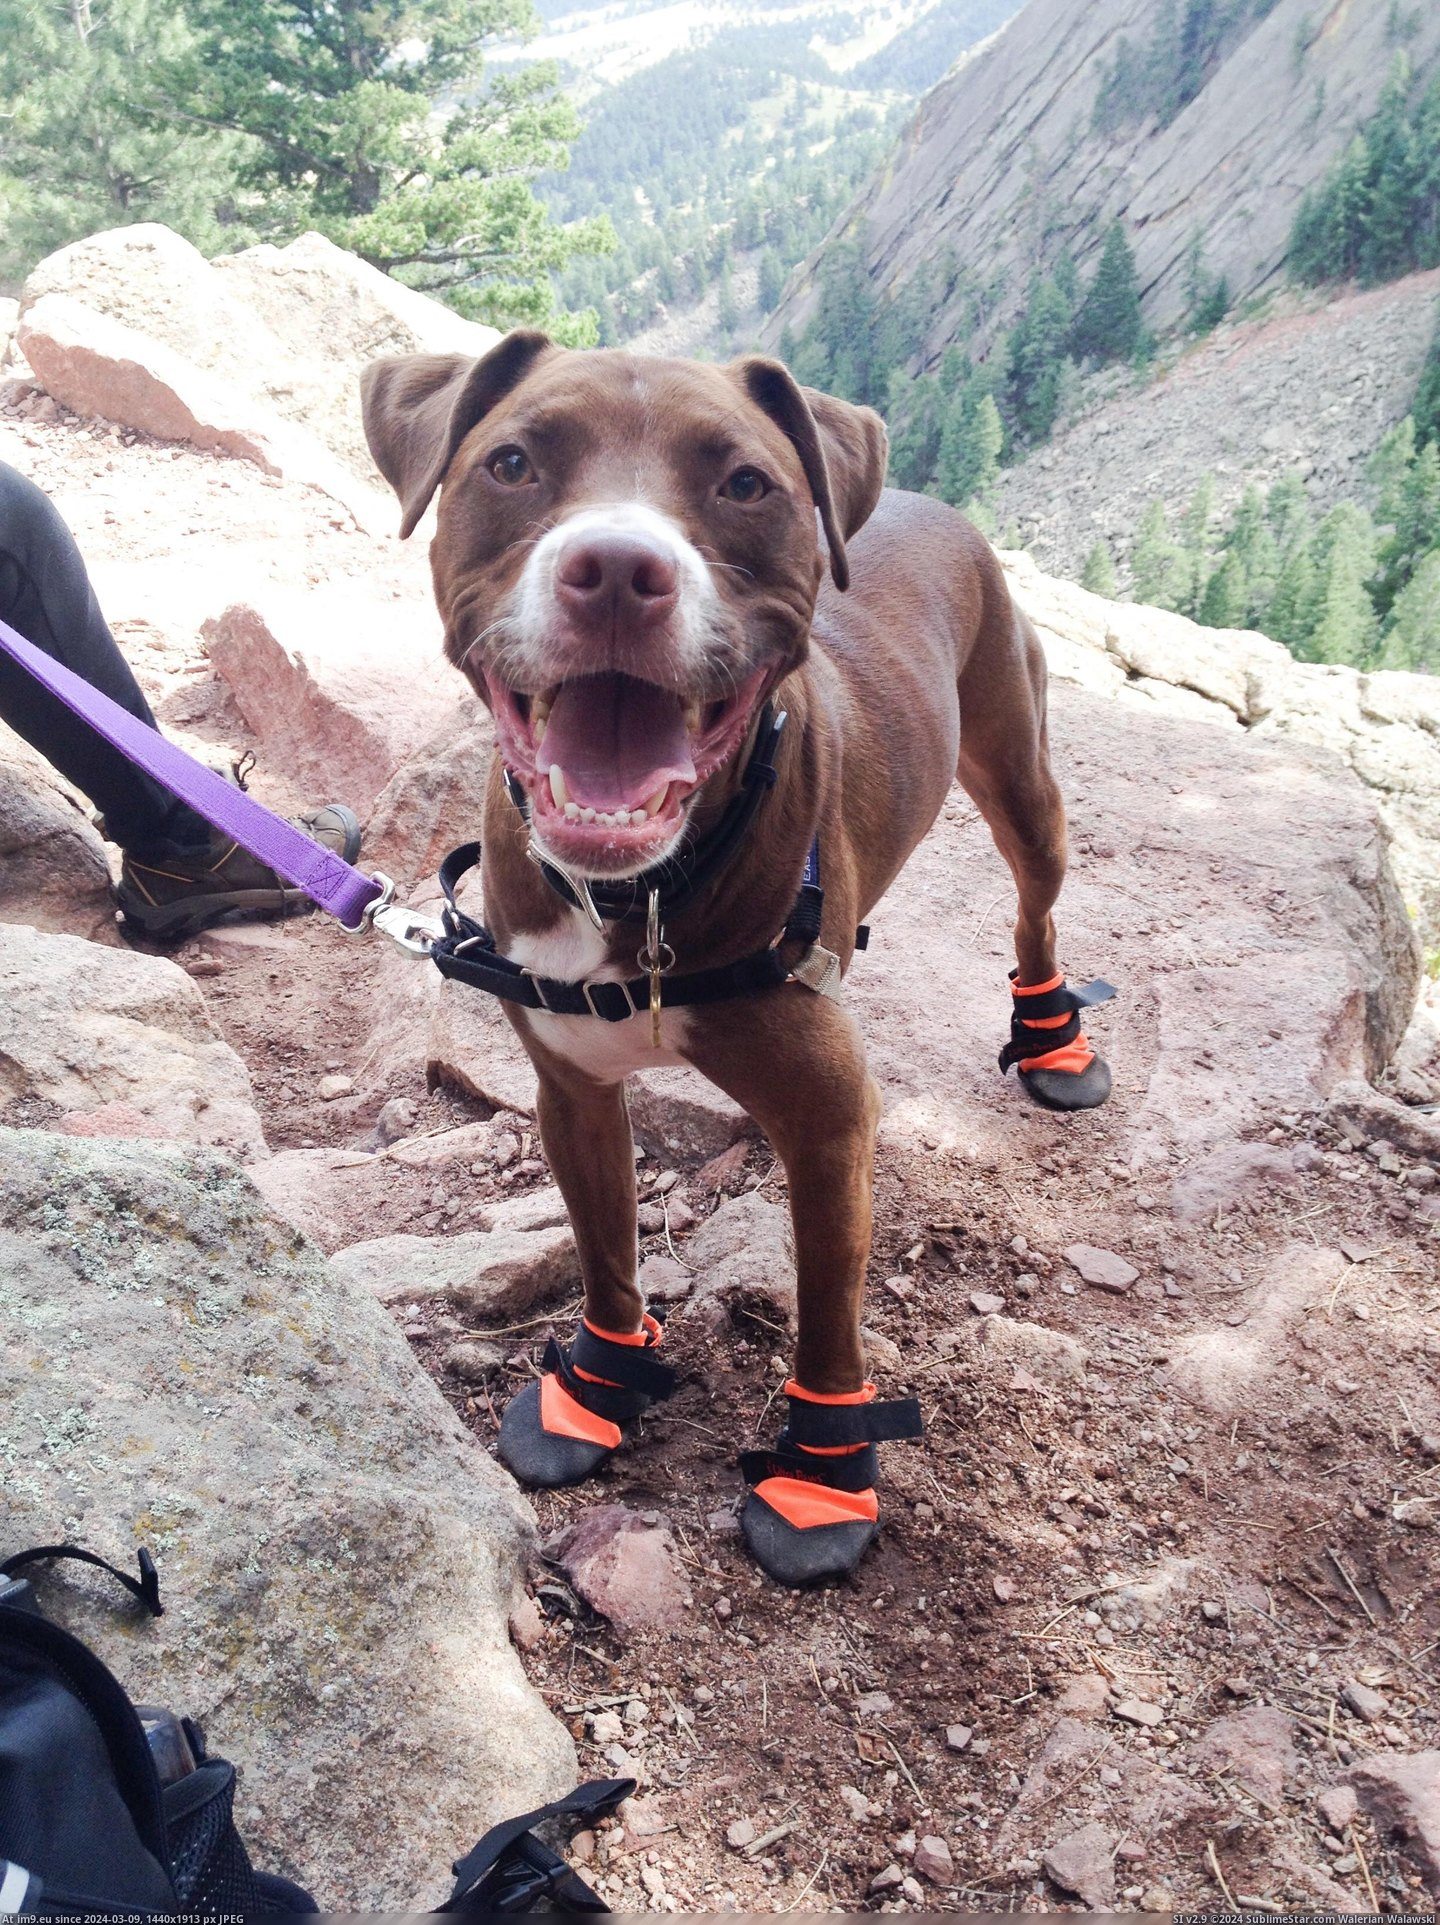 #Dog #Popular #Wore #Boots #Trail [Aww] He wore his new boots today and was the most popular dog on the trail! Pic. (Obraz z album My r/AWW favs))